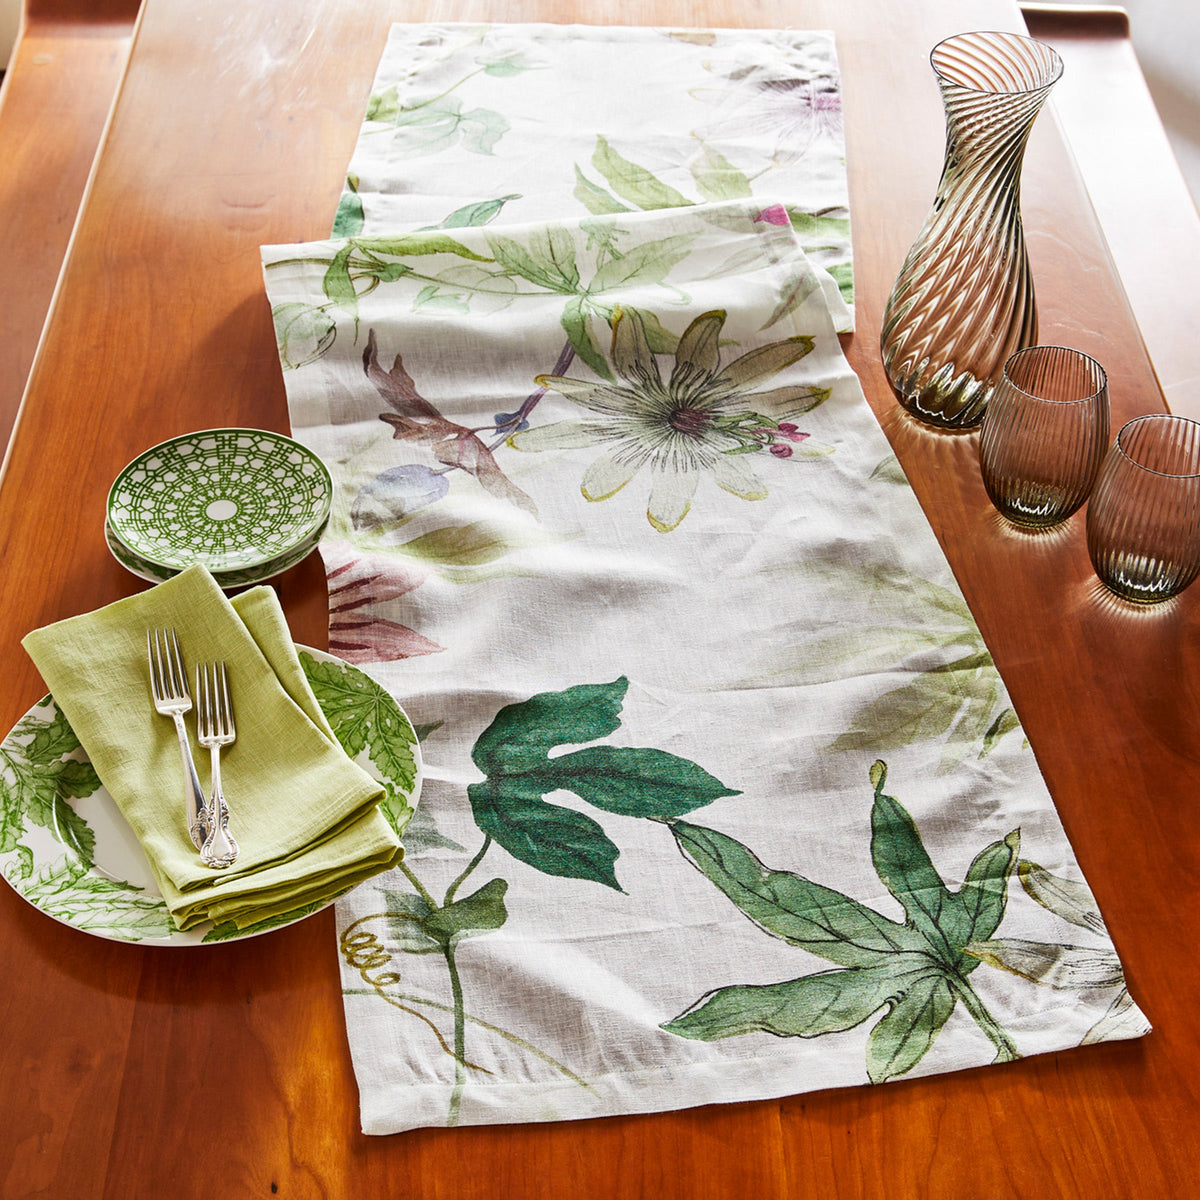 A Passionflower Linen Table Runner with green passionflowers by TTT.